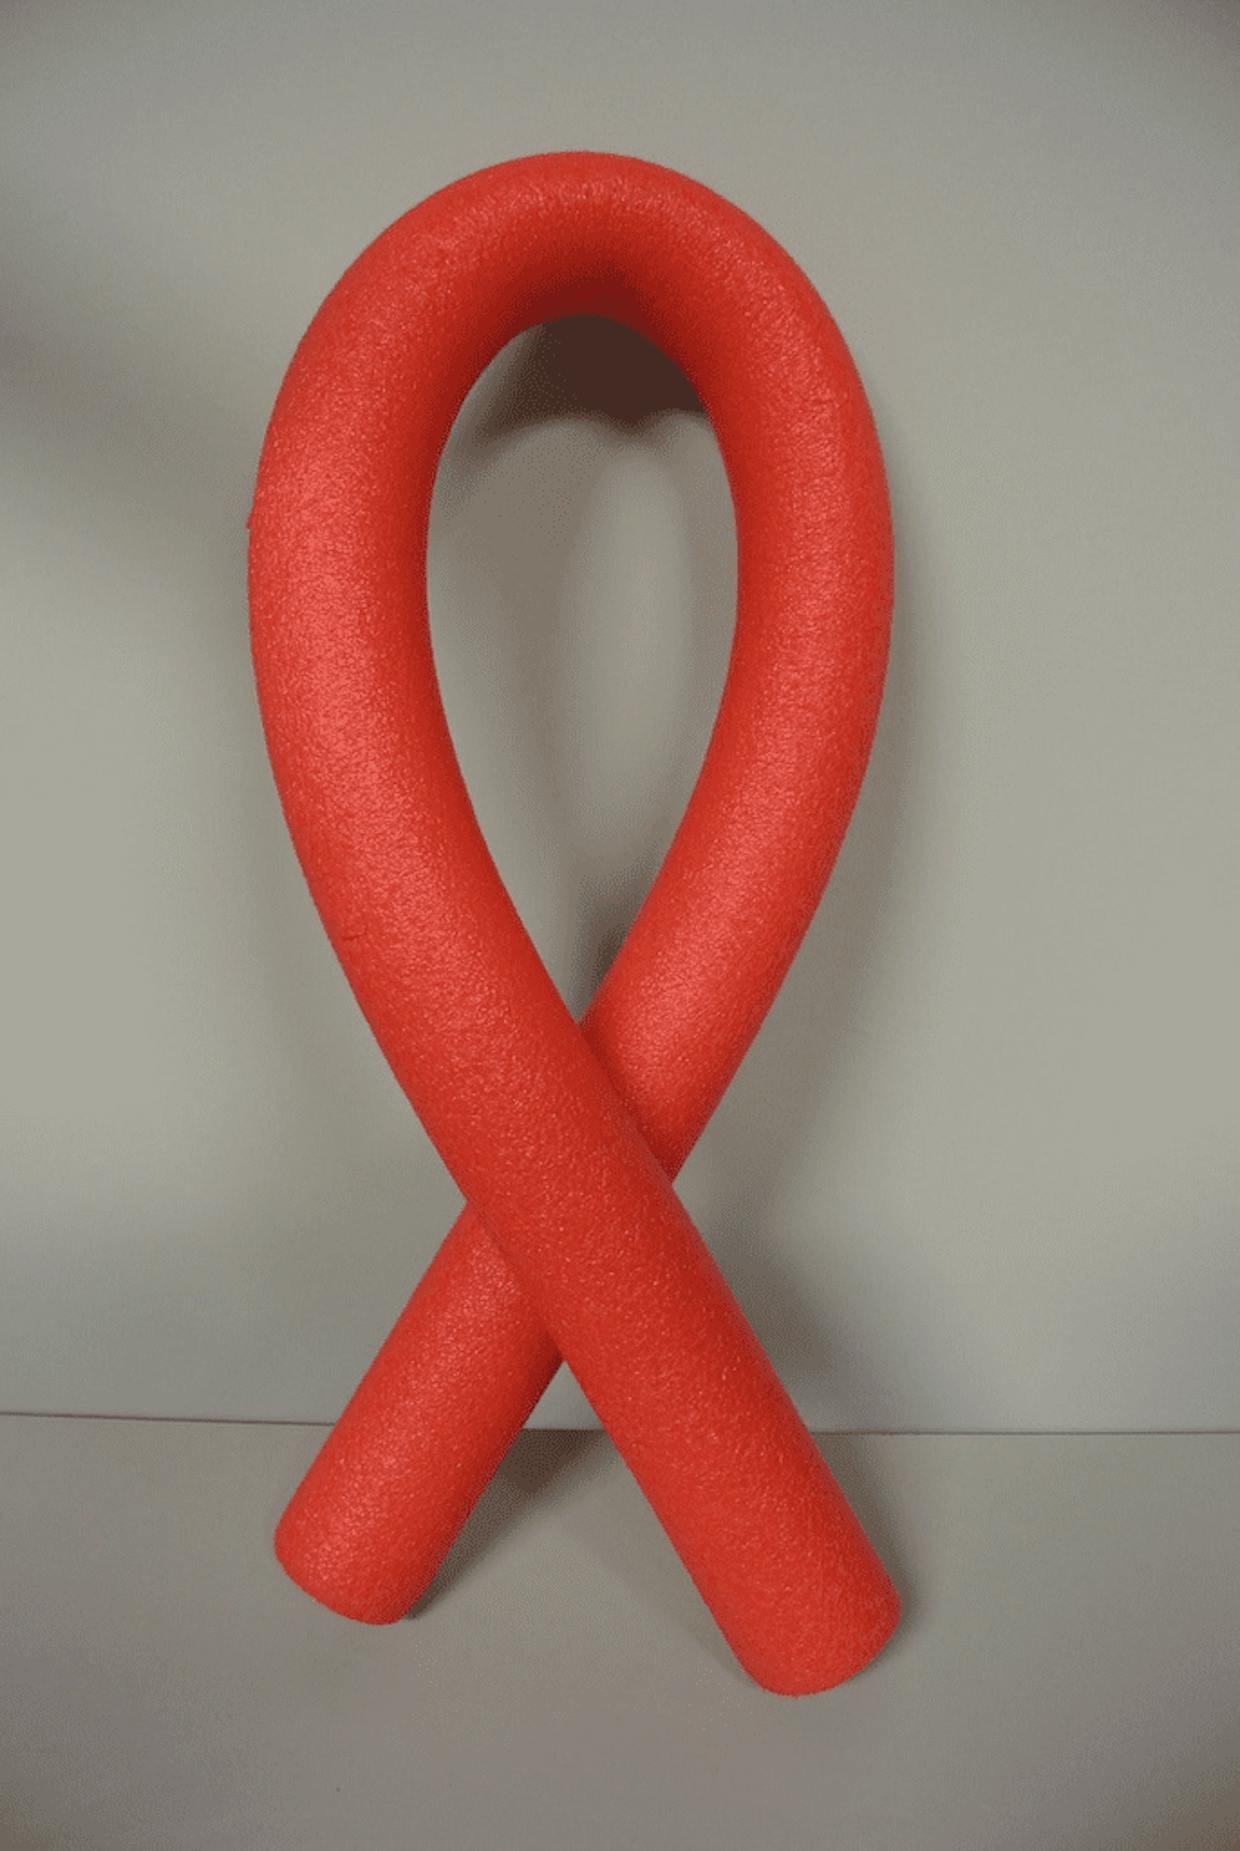 Is there any instructions on how to bend conduit into a cancer ribbon frame? I need to make one to put balloons on like this (https://i.pinimg.com/236x/14/71/e9/1471e9178094299c0c052d18bb4ebbcb--cancer-ribbons-cancer-awareness.jpg)